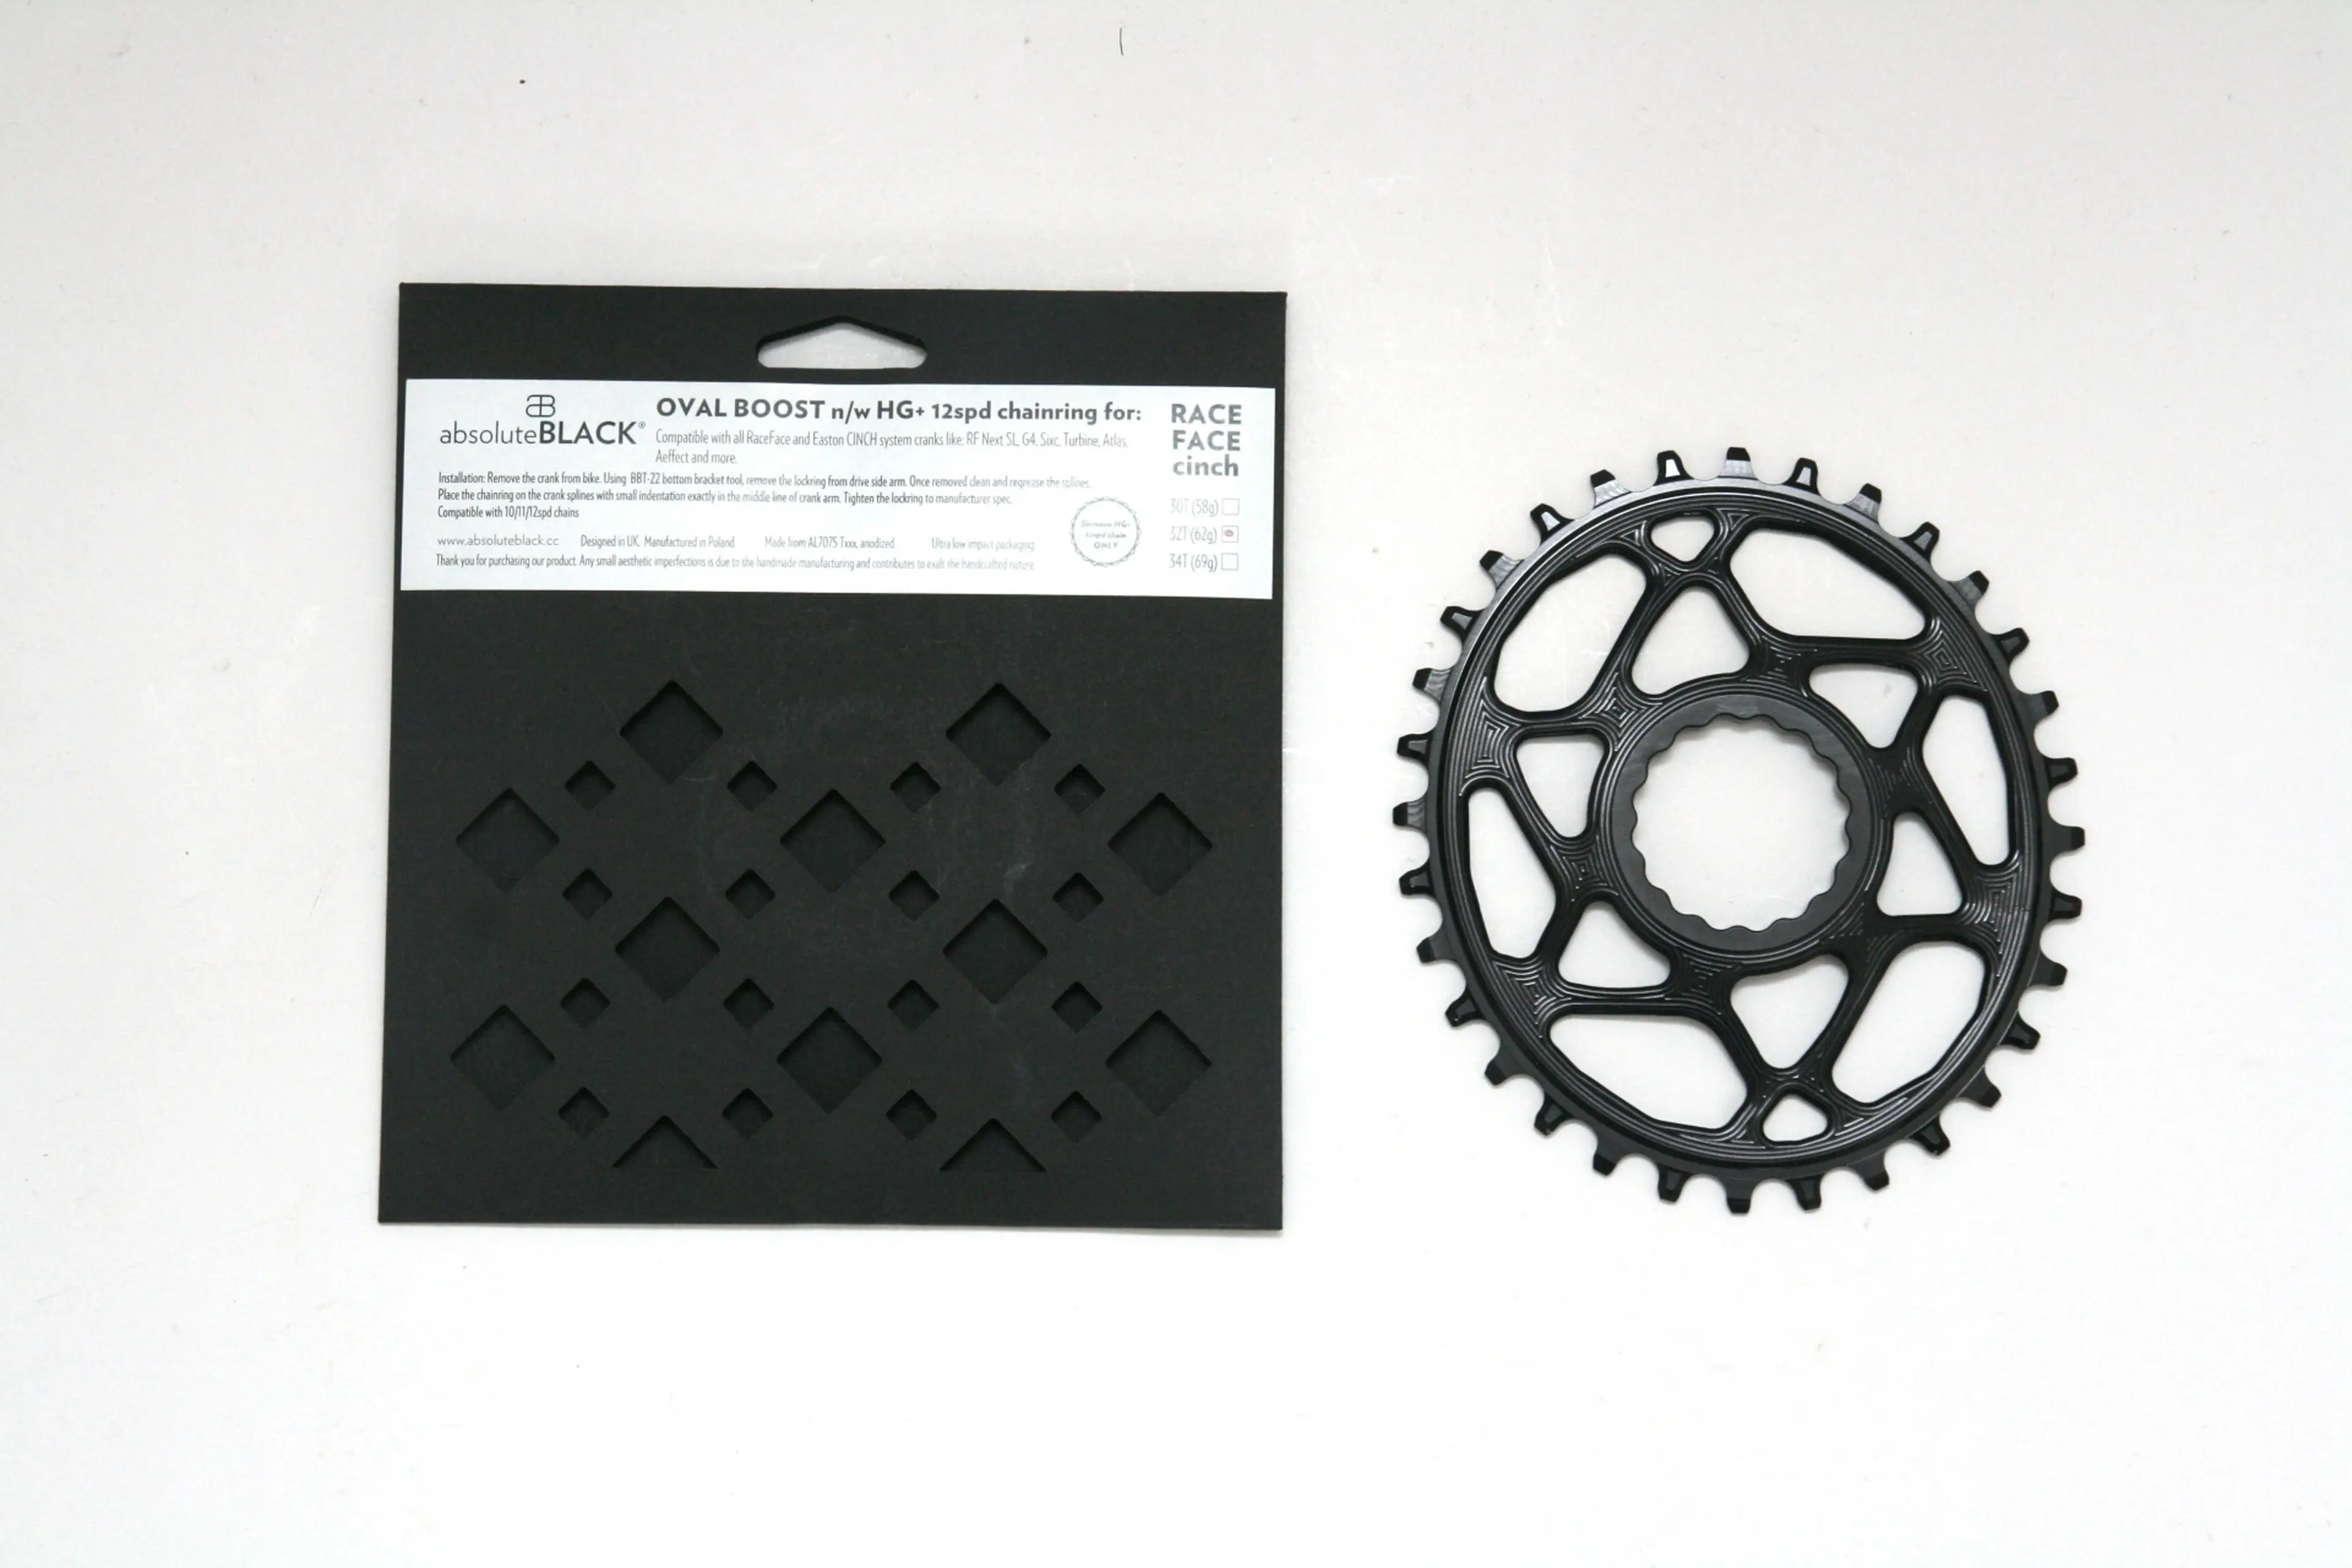 3. Placa Absolute Black - Race Face OVAL Cinch Boost 148 Shimano 12spd Hyperglide+